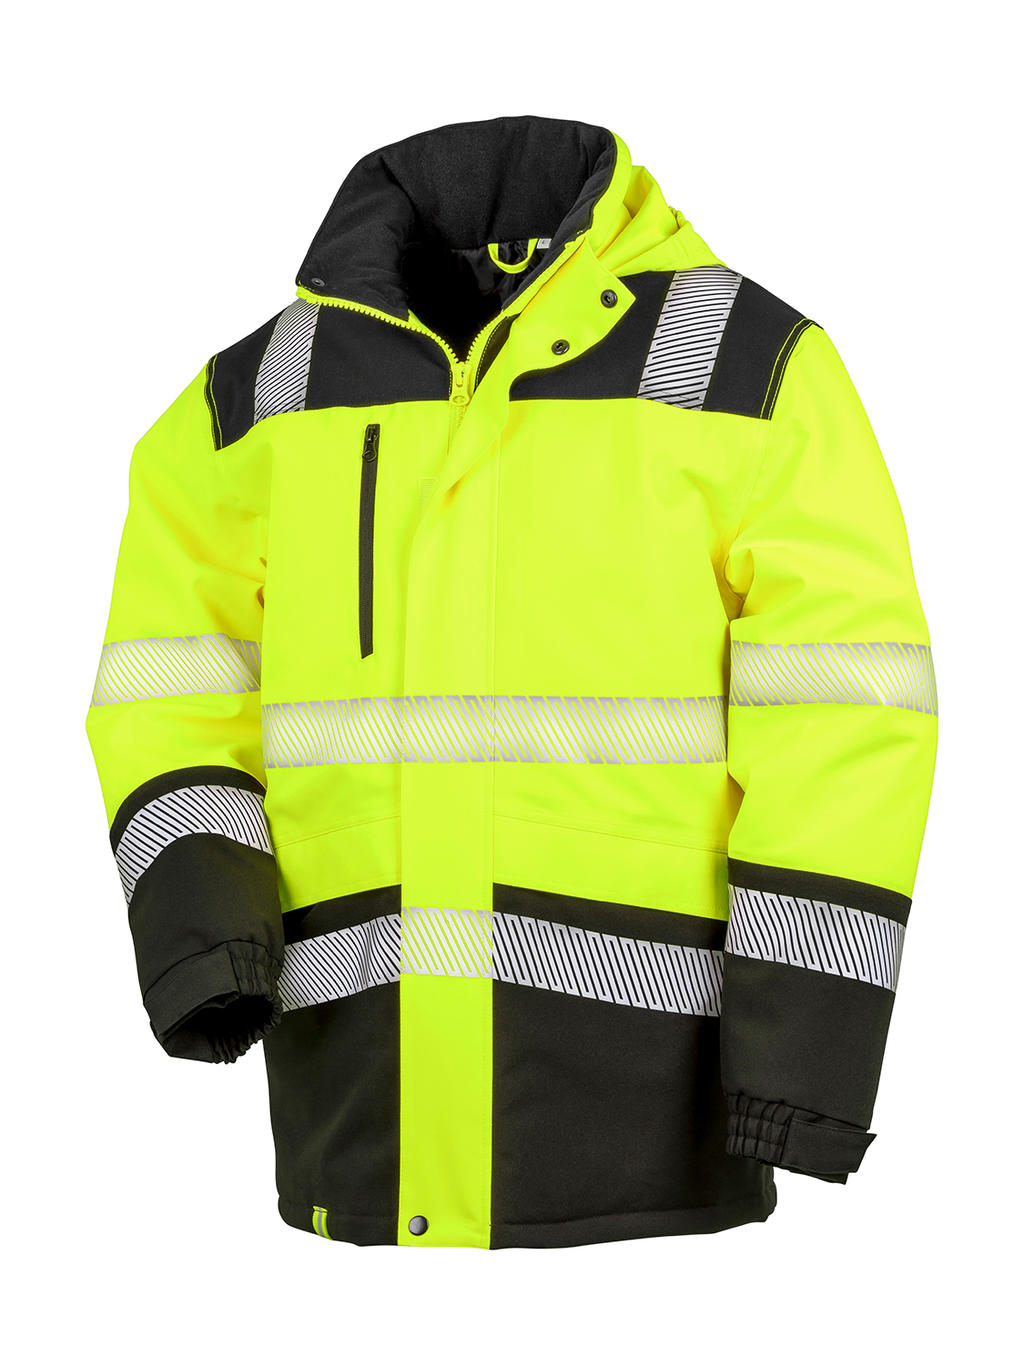  Printable Waterproof Softshell Safety Coat in Farbe Fluorescent Yellow/Black